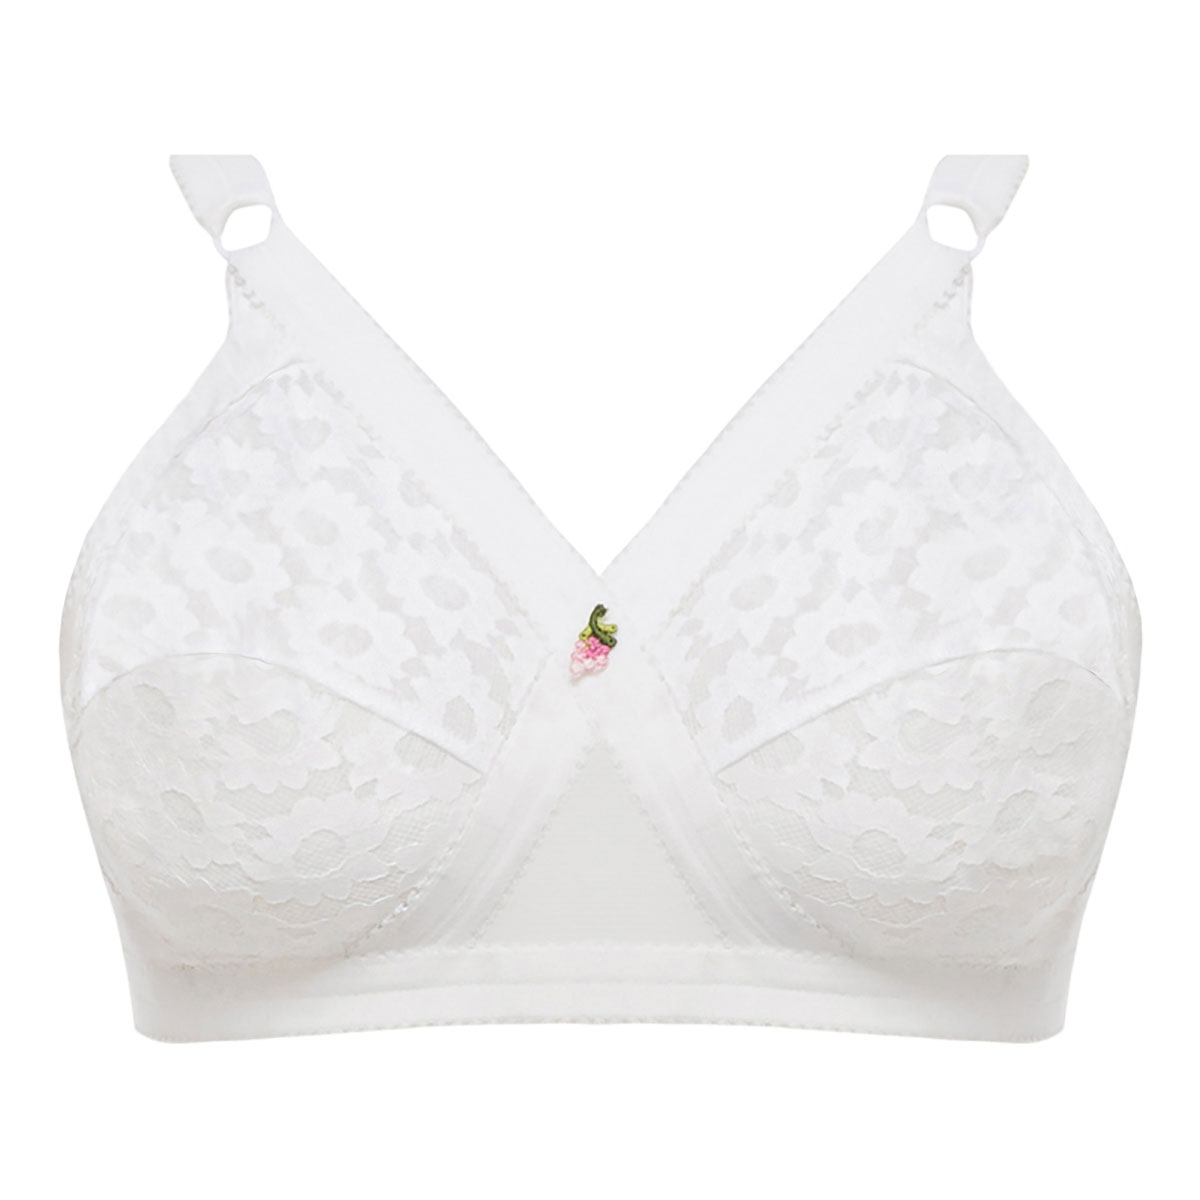 Playtex Women's 152 Cross Your Heart, Color: White (Blanc 000), Size: 42G:  Buy Online at Best Price in UAE 